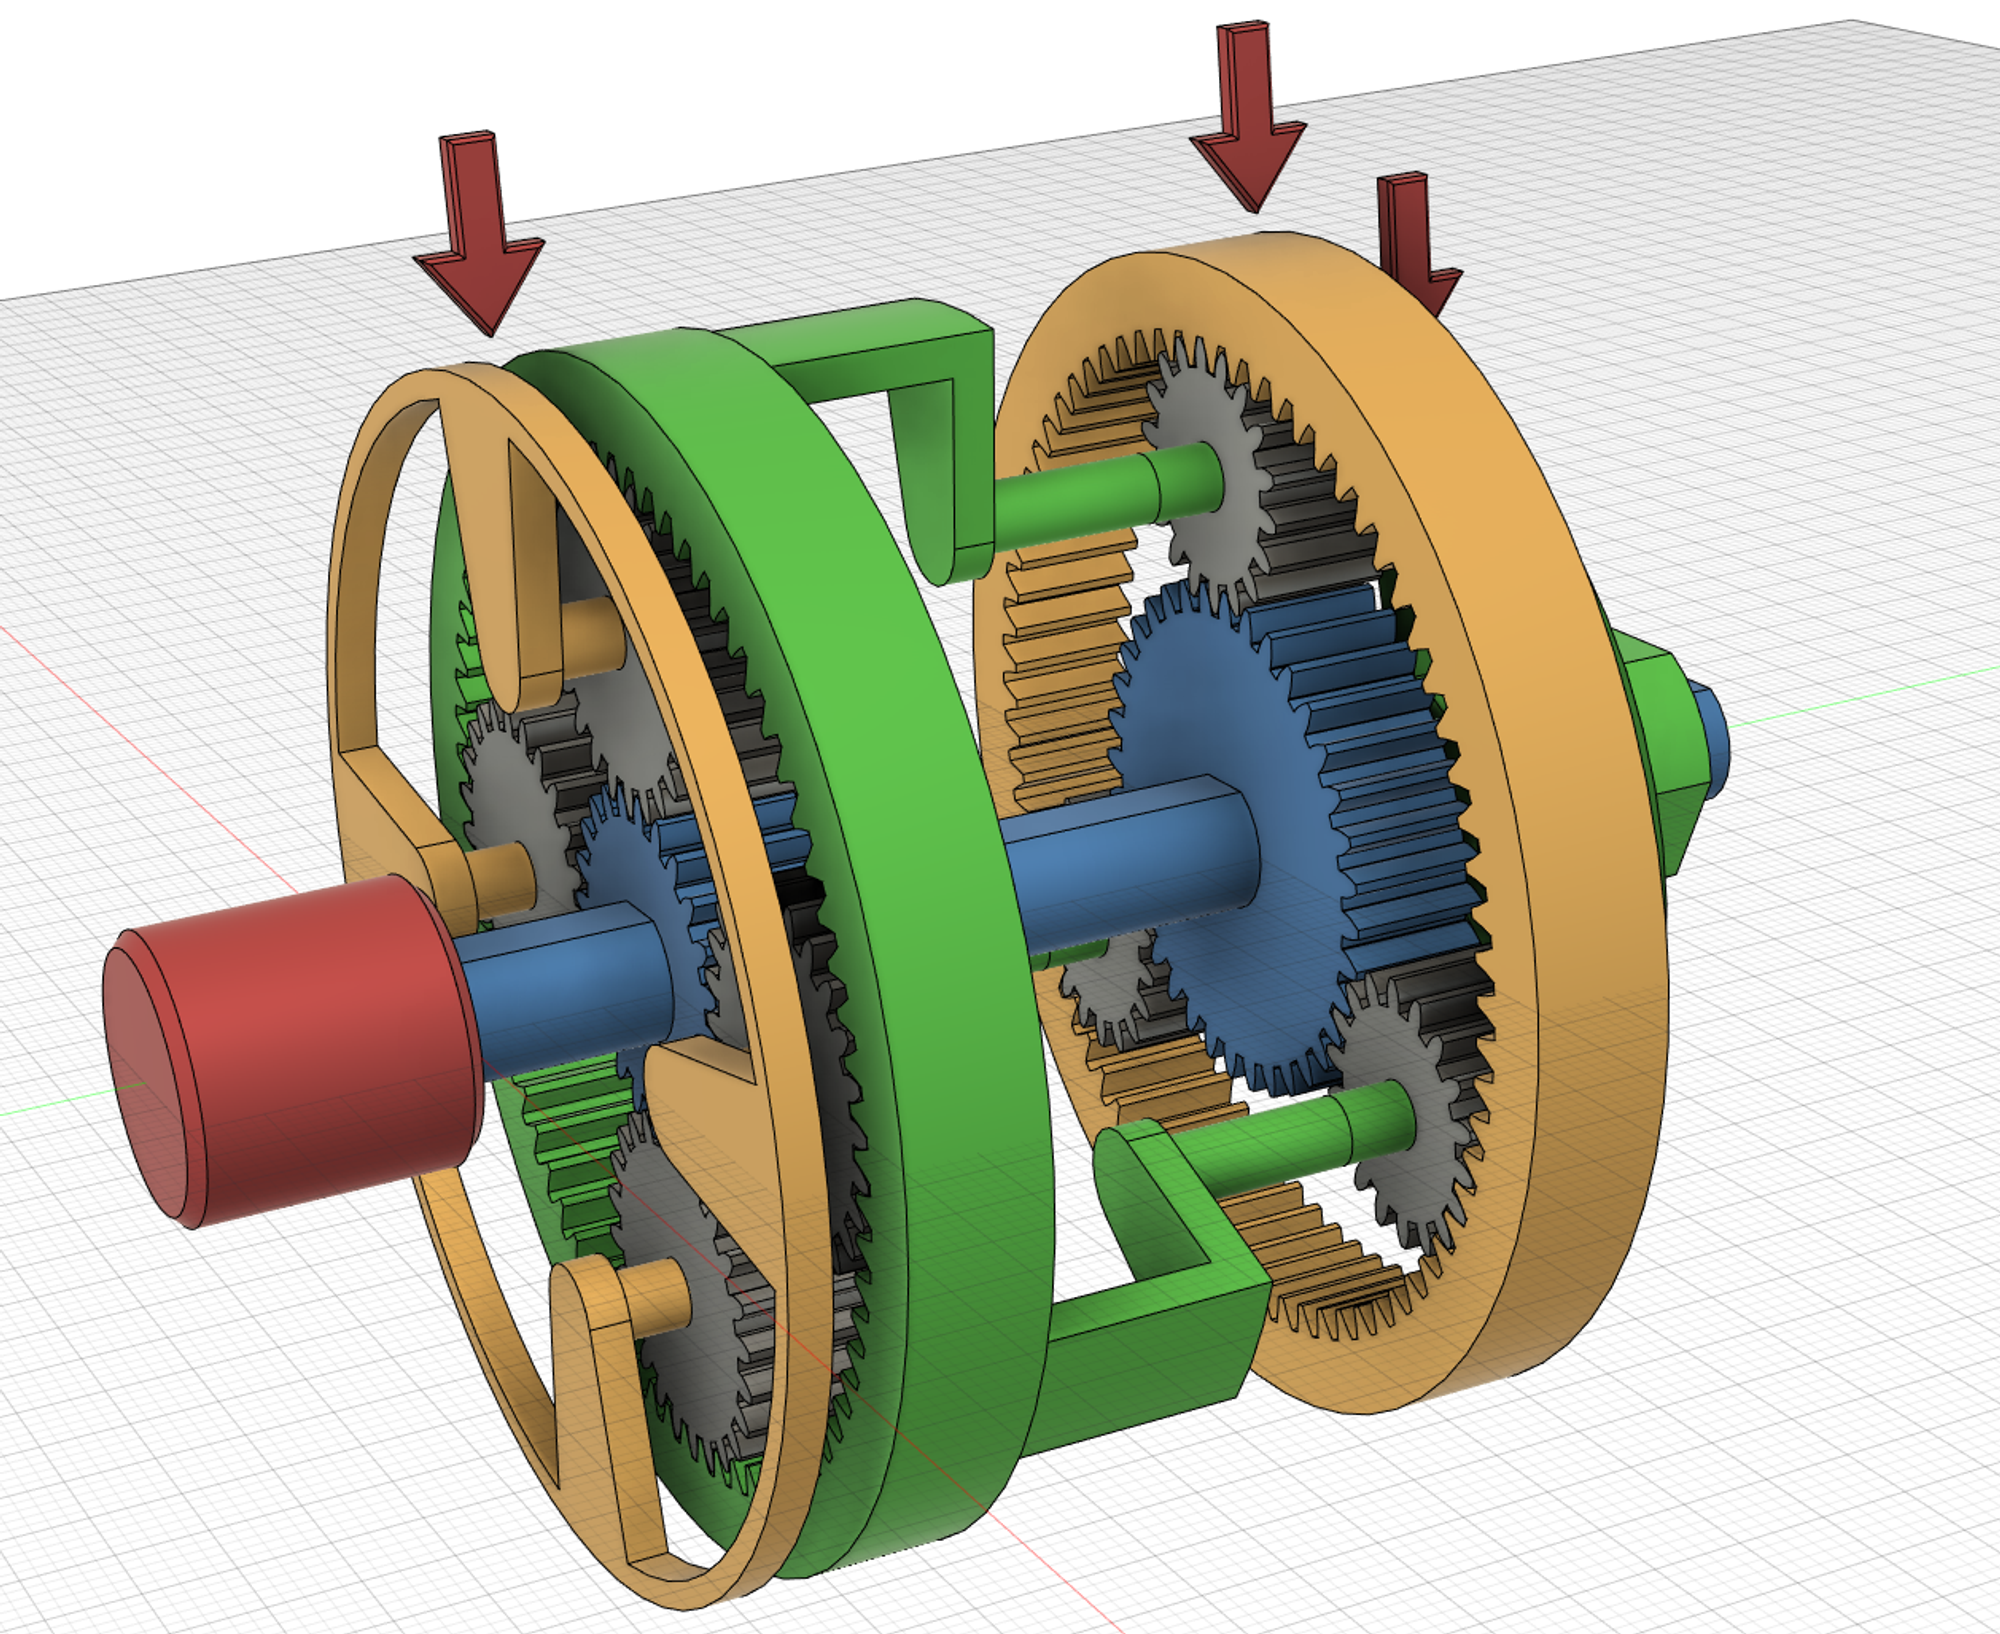 A simple reversing gearbox using planetary gear sets